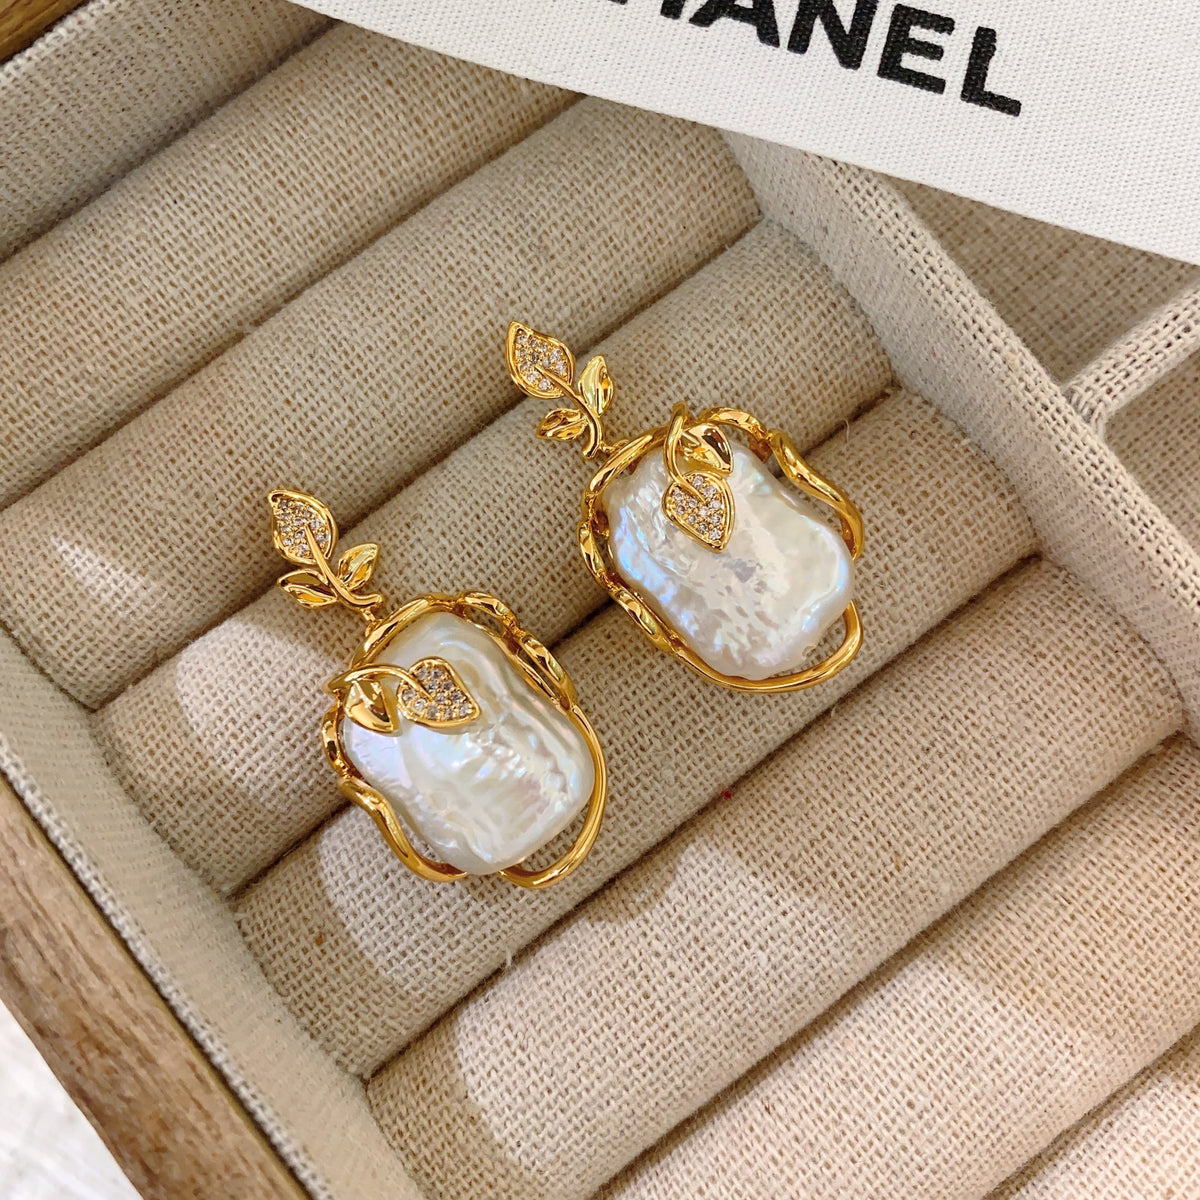 New High-end Vintage Natural Baroque Pearl Gold-plated Earrings